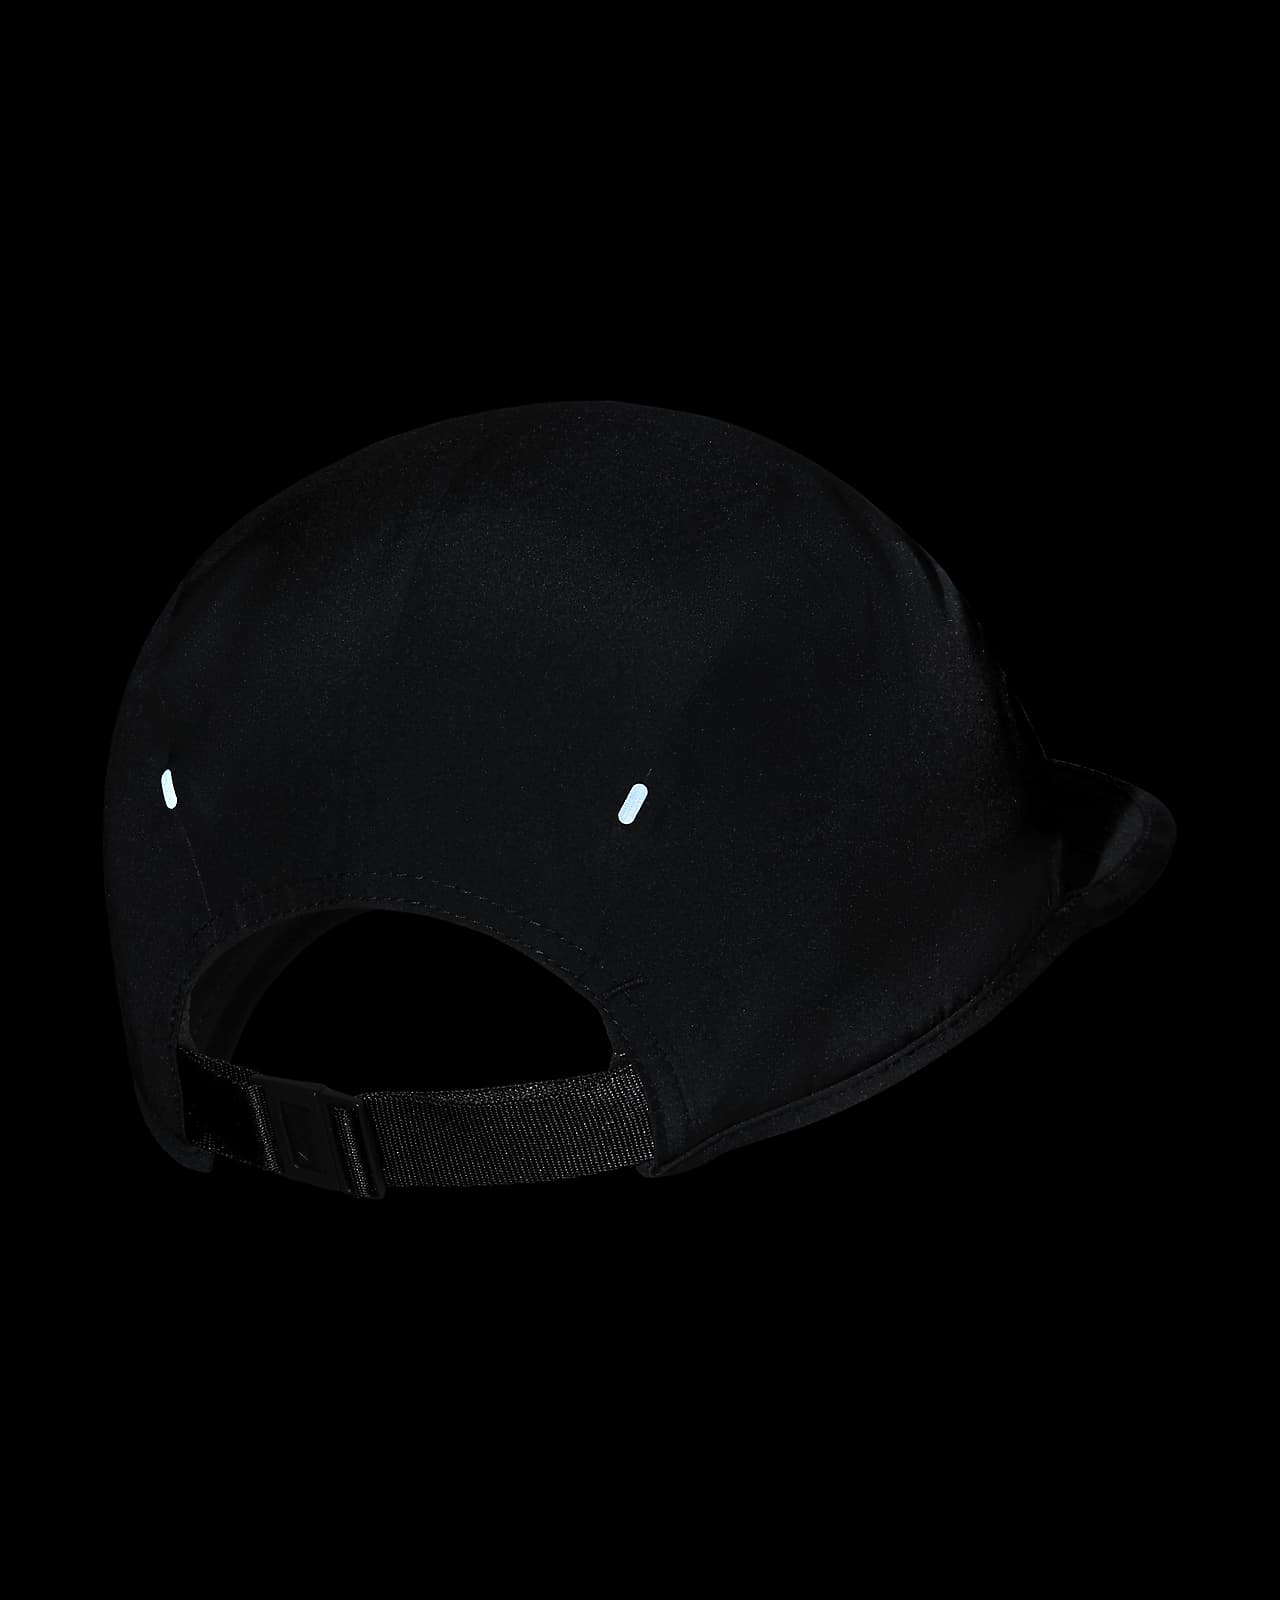 Nike Storm-FIT ADV Fly Unstructured AeroBill Cap